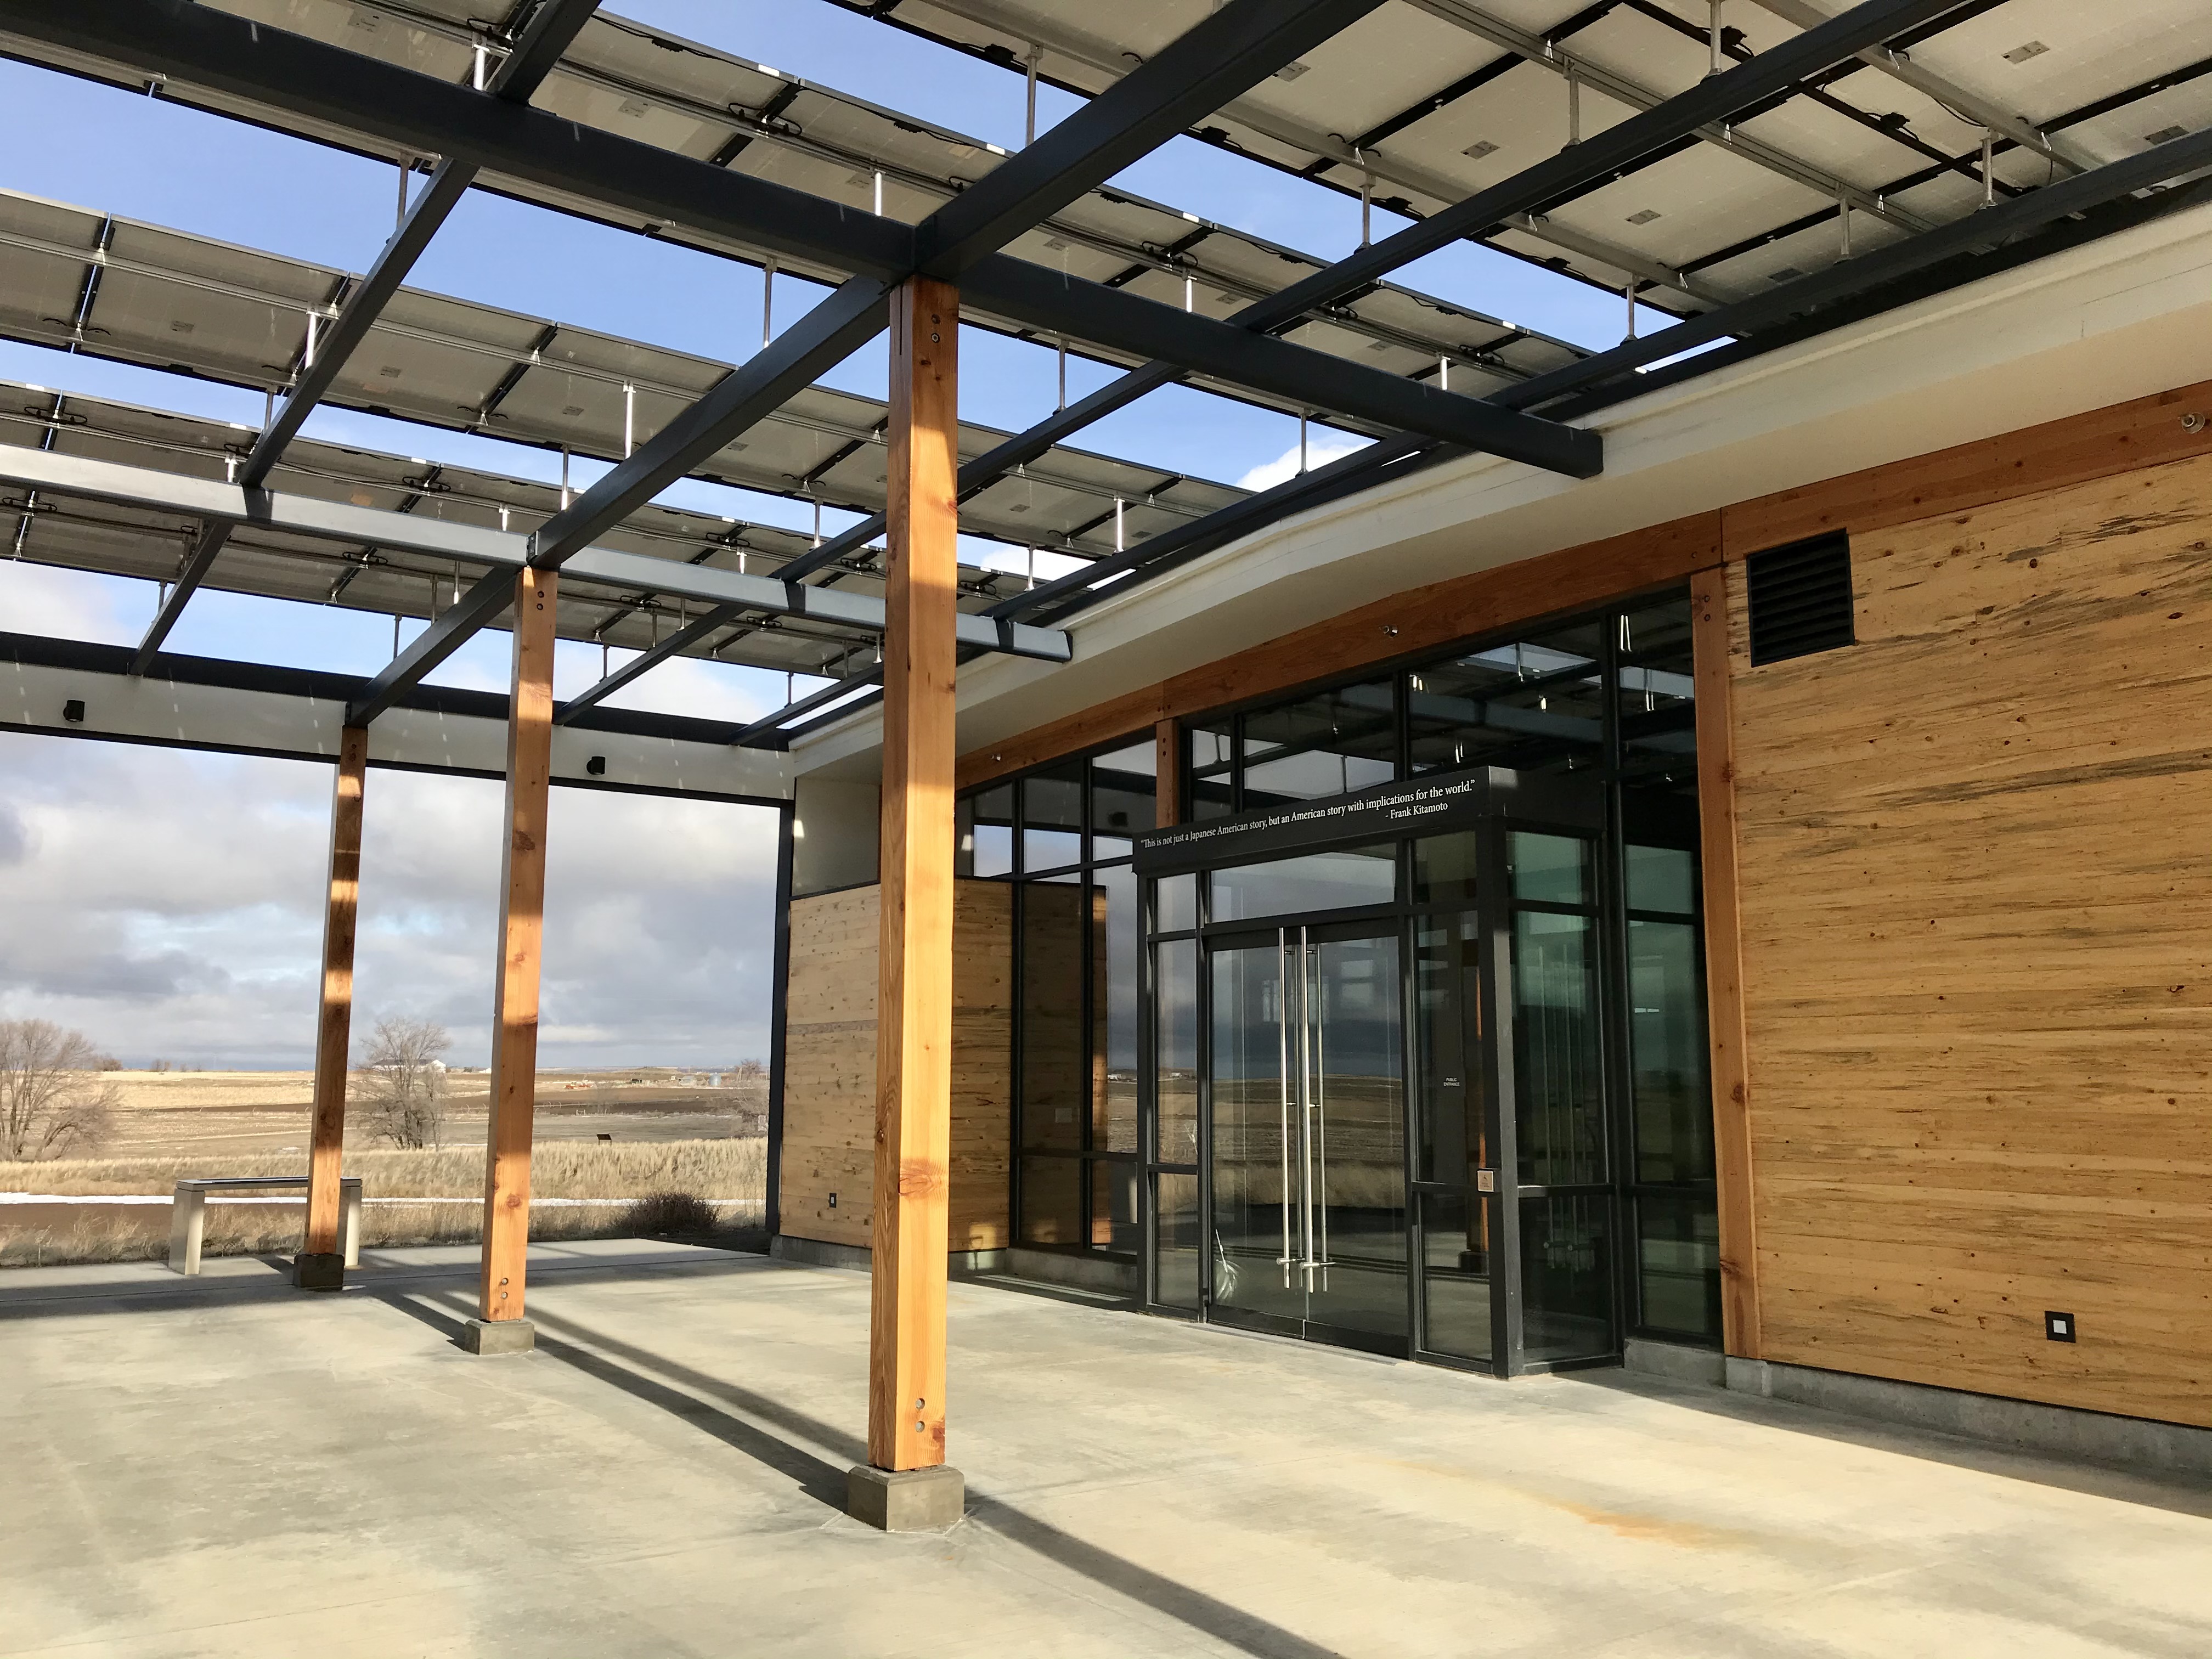 Exterior shot of the patio and glass entrance doors of the Minidoka visitor center.